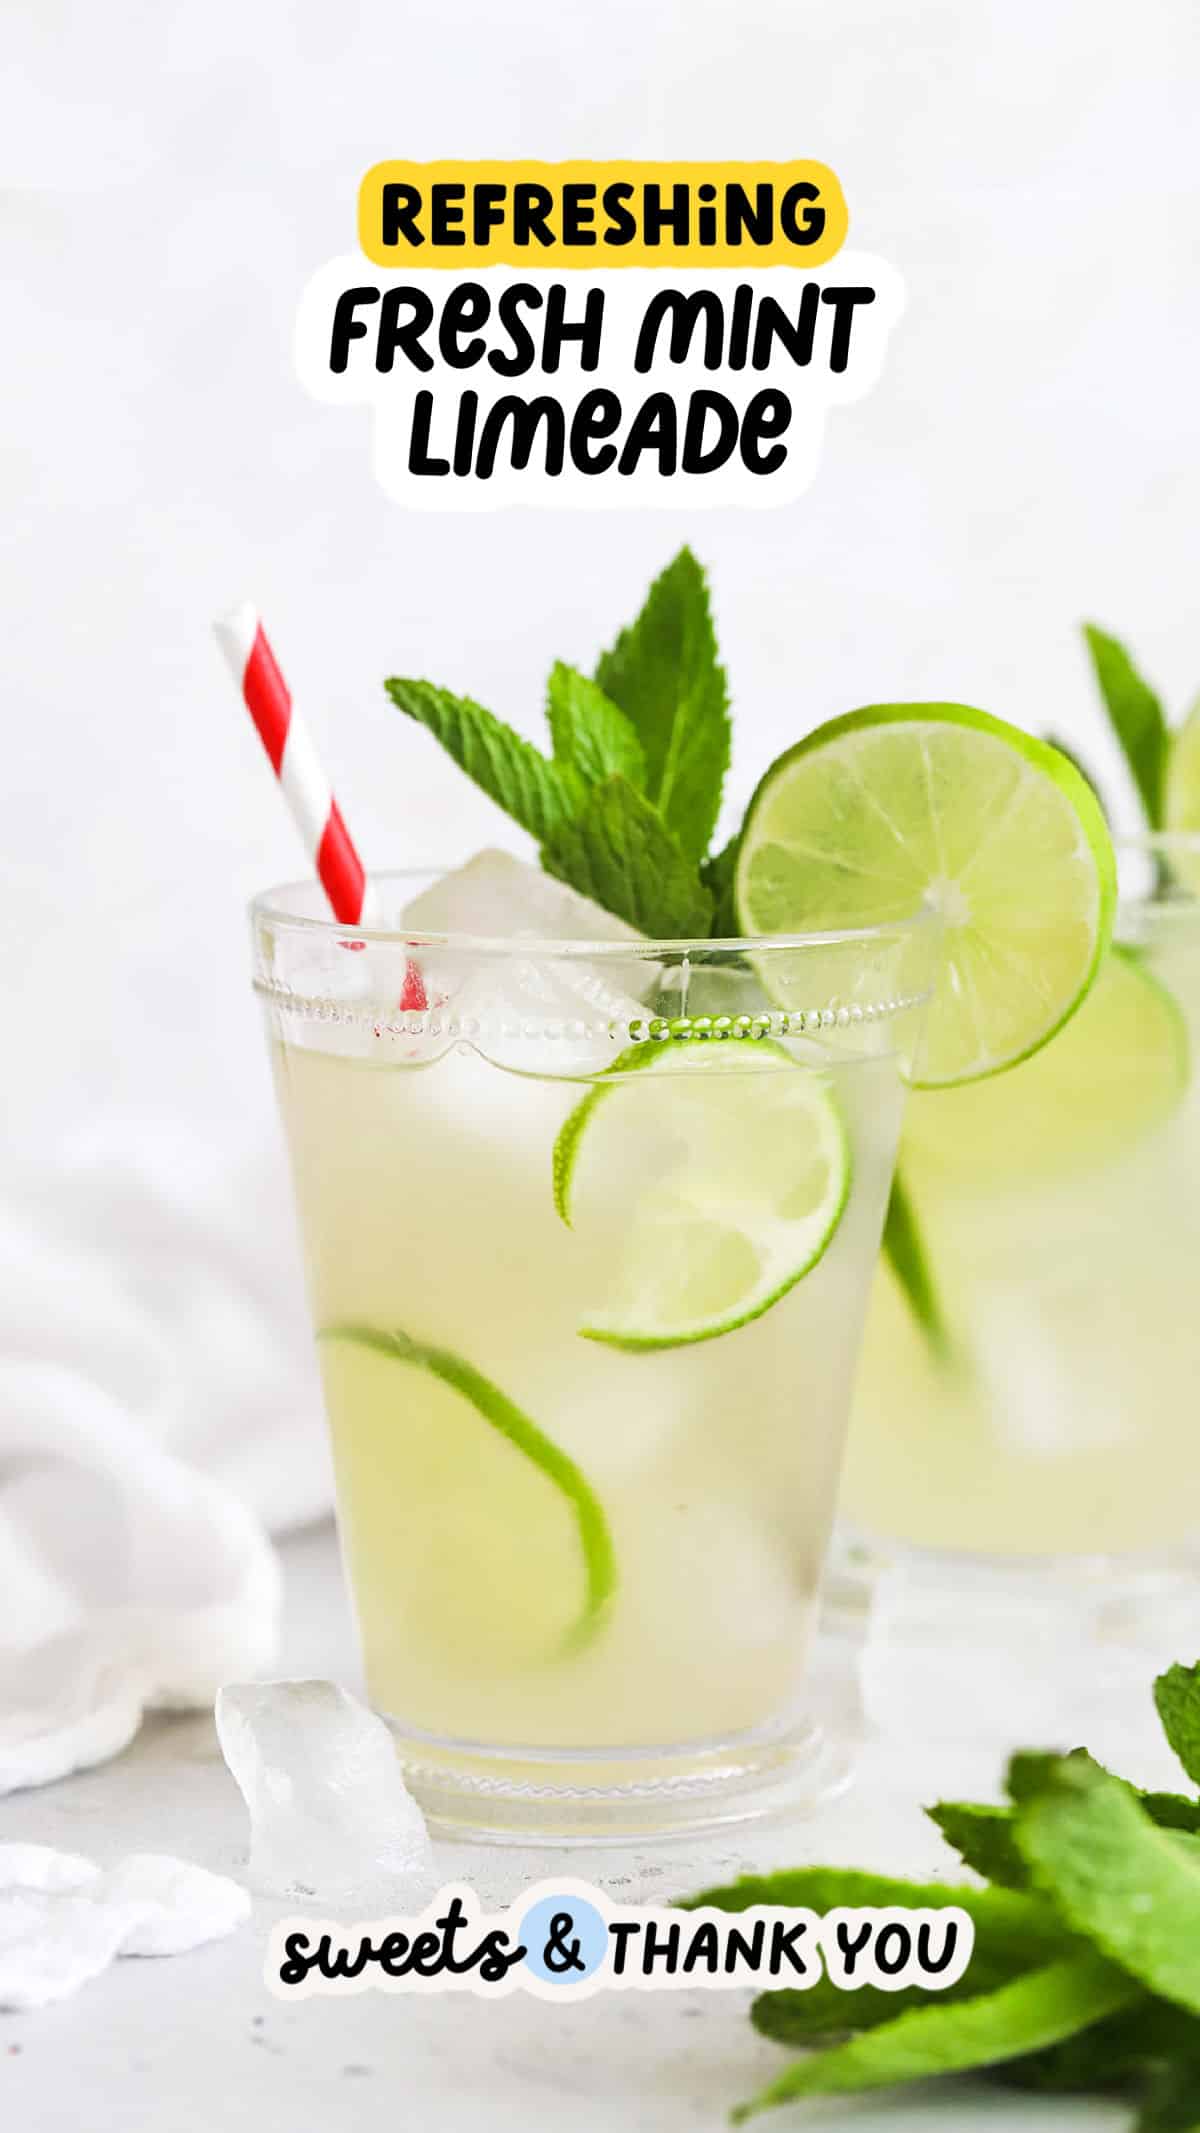 Let's make Mint Limeade AKA Virgin Mojitos! This homemade limeade recipe is kissed with fresh mint & tastes amazing. It's the perfect non-alcoholic drink for a celebration! (like drinking a virgin mojito!)